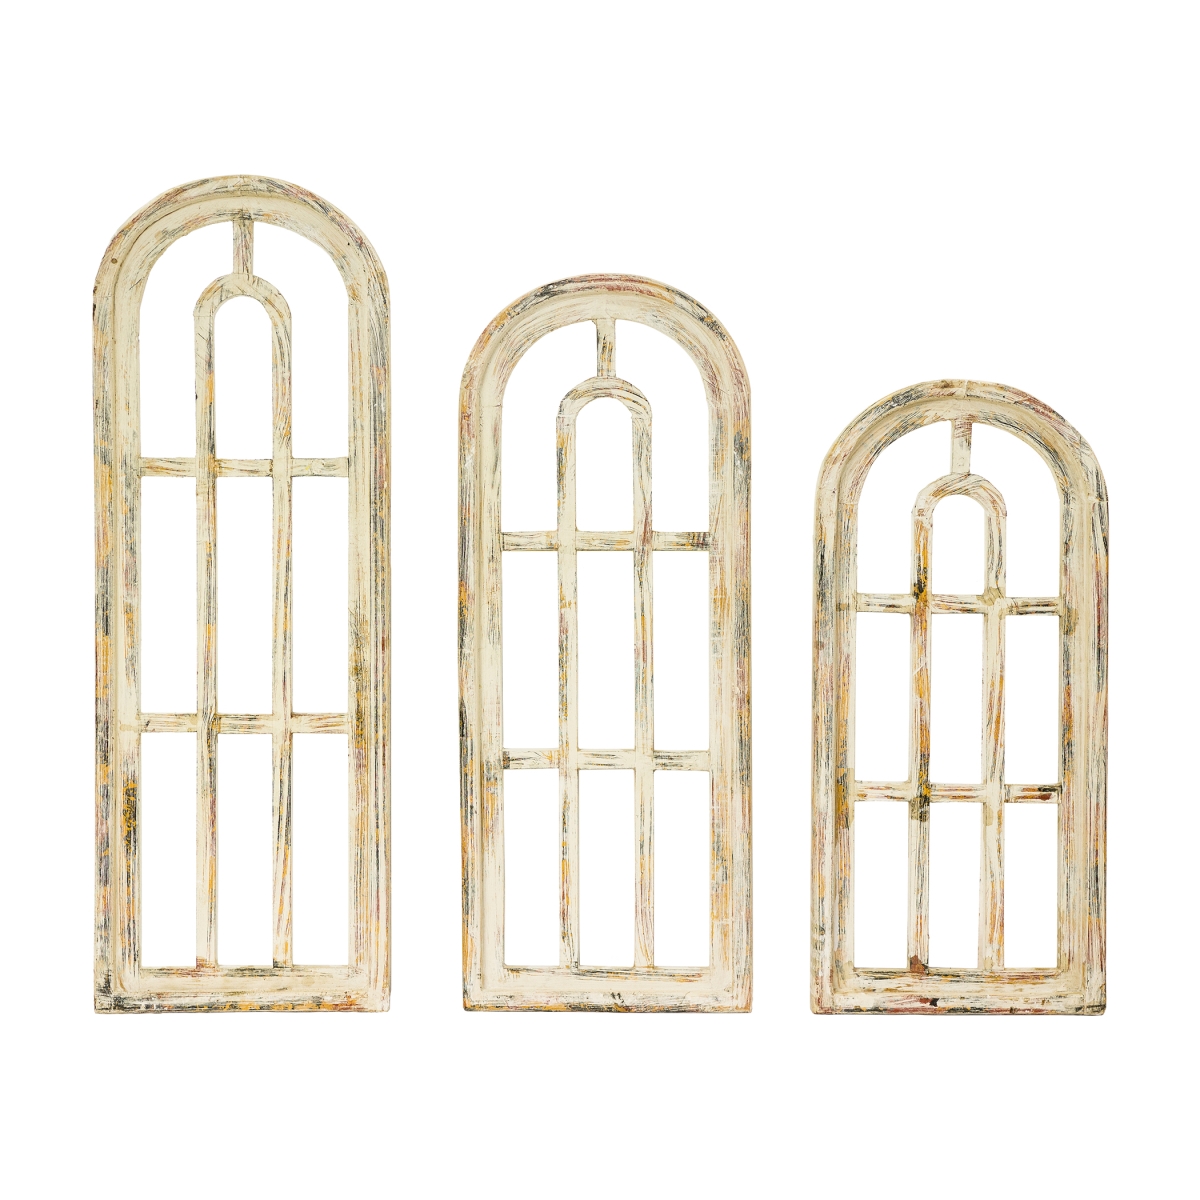 12453 Round Window Wall Accent - Set Of 3